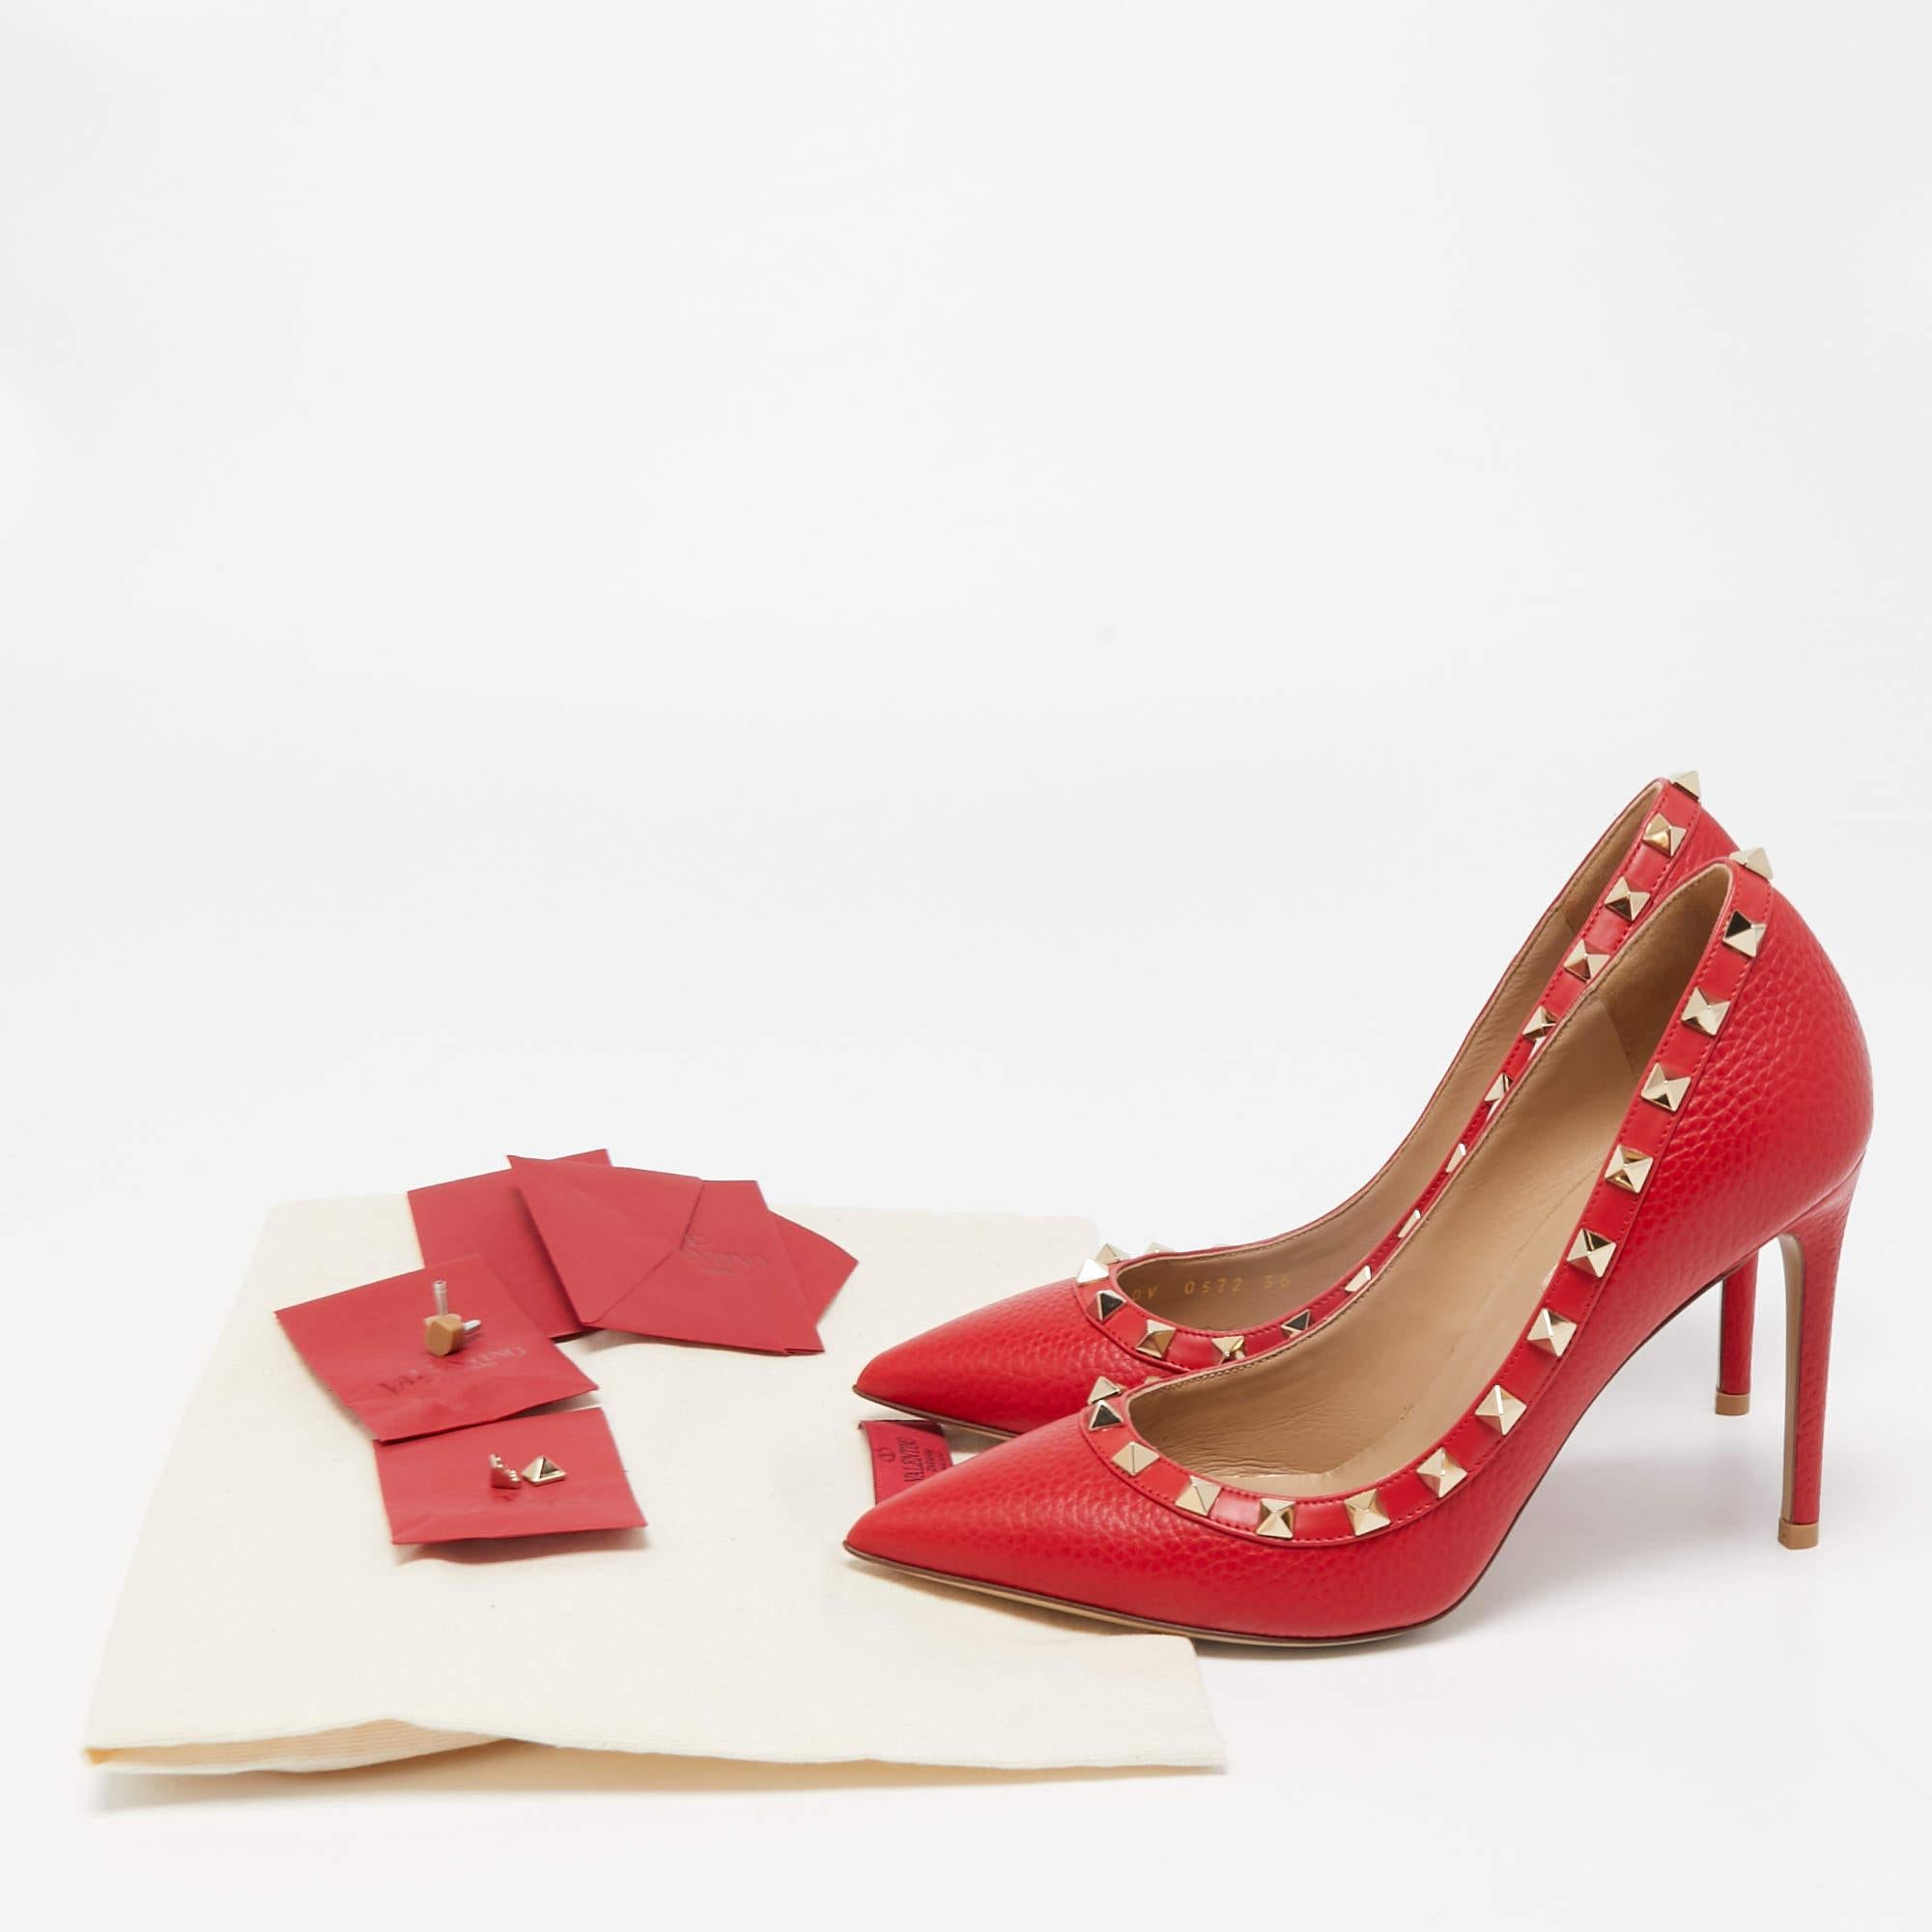 Valentino Red Leather Rockstud Pumps Size 36 4